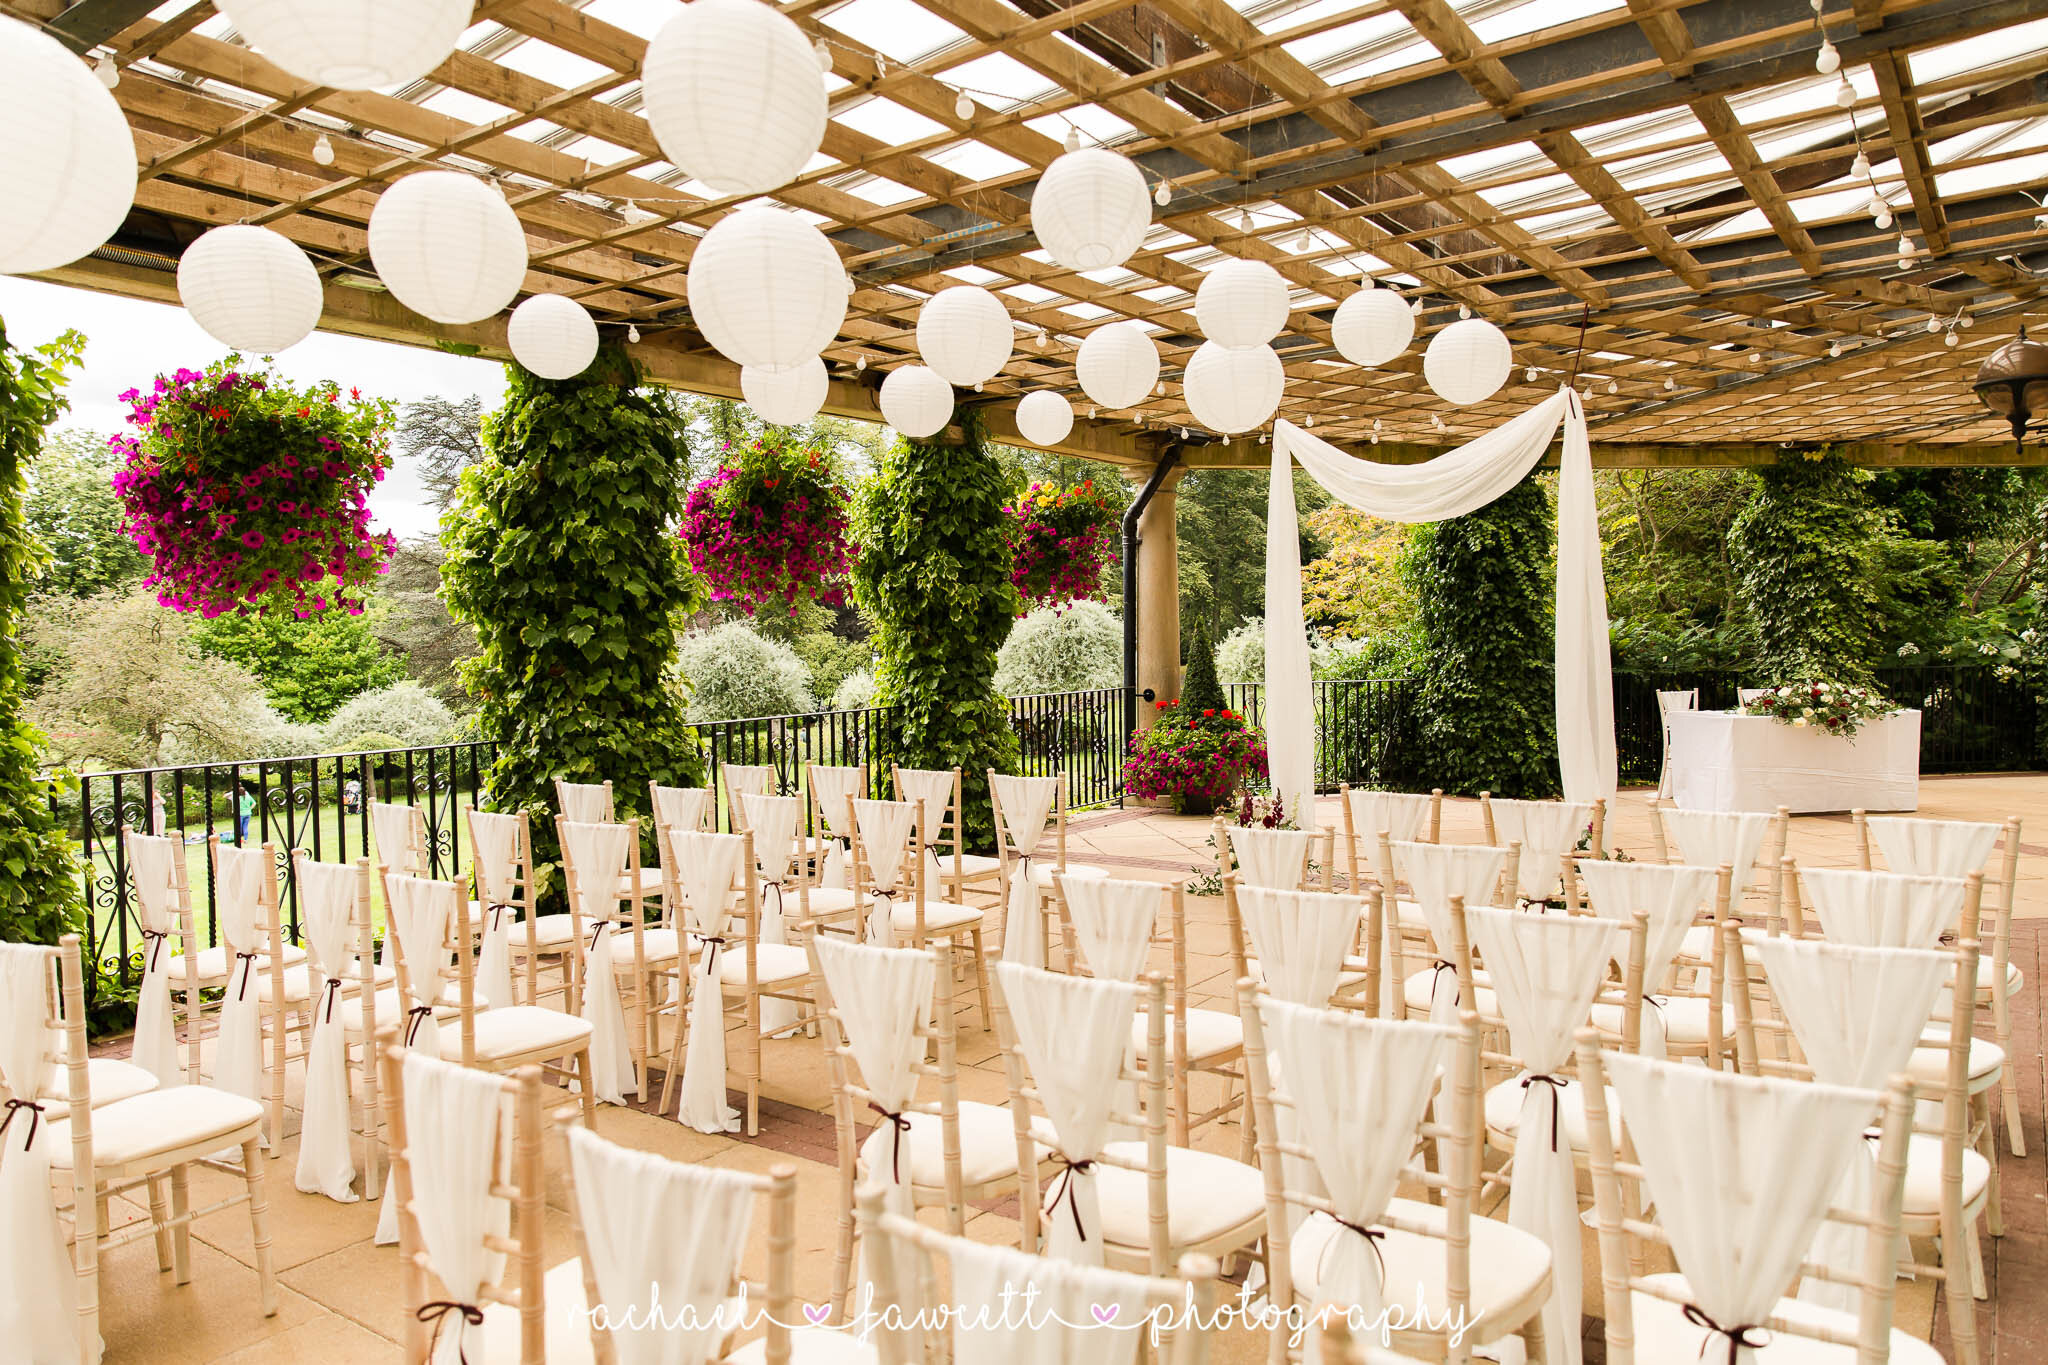 🩷 CEREMONY  LOCATION 🩷

How lucky we are in Yorkshire to have some of the dreamiest, fairytale locations to say your vows. ✨ Indoor, outdoor, overlooking the ocean or the countryside - which would you choose? 😍💞

@sunpavilion.harrogate 
@hospitiu